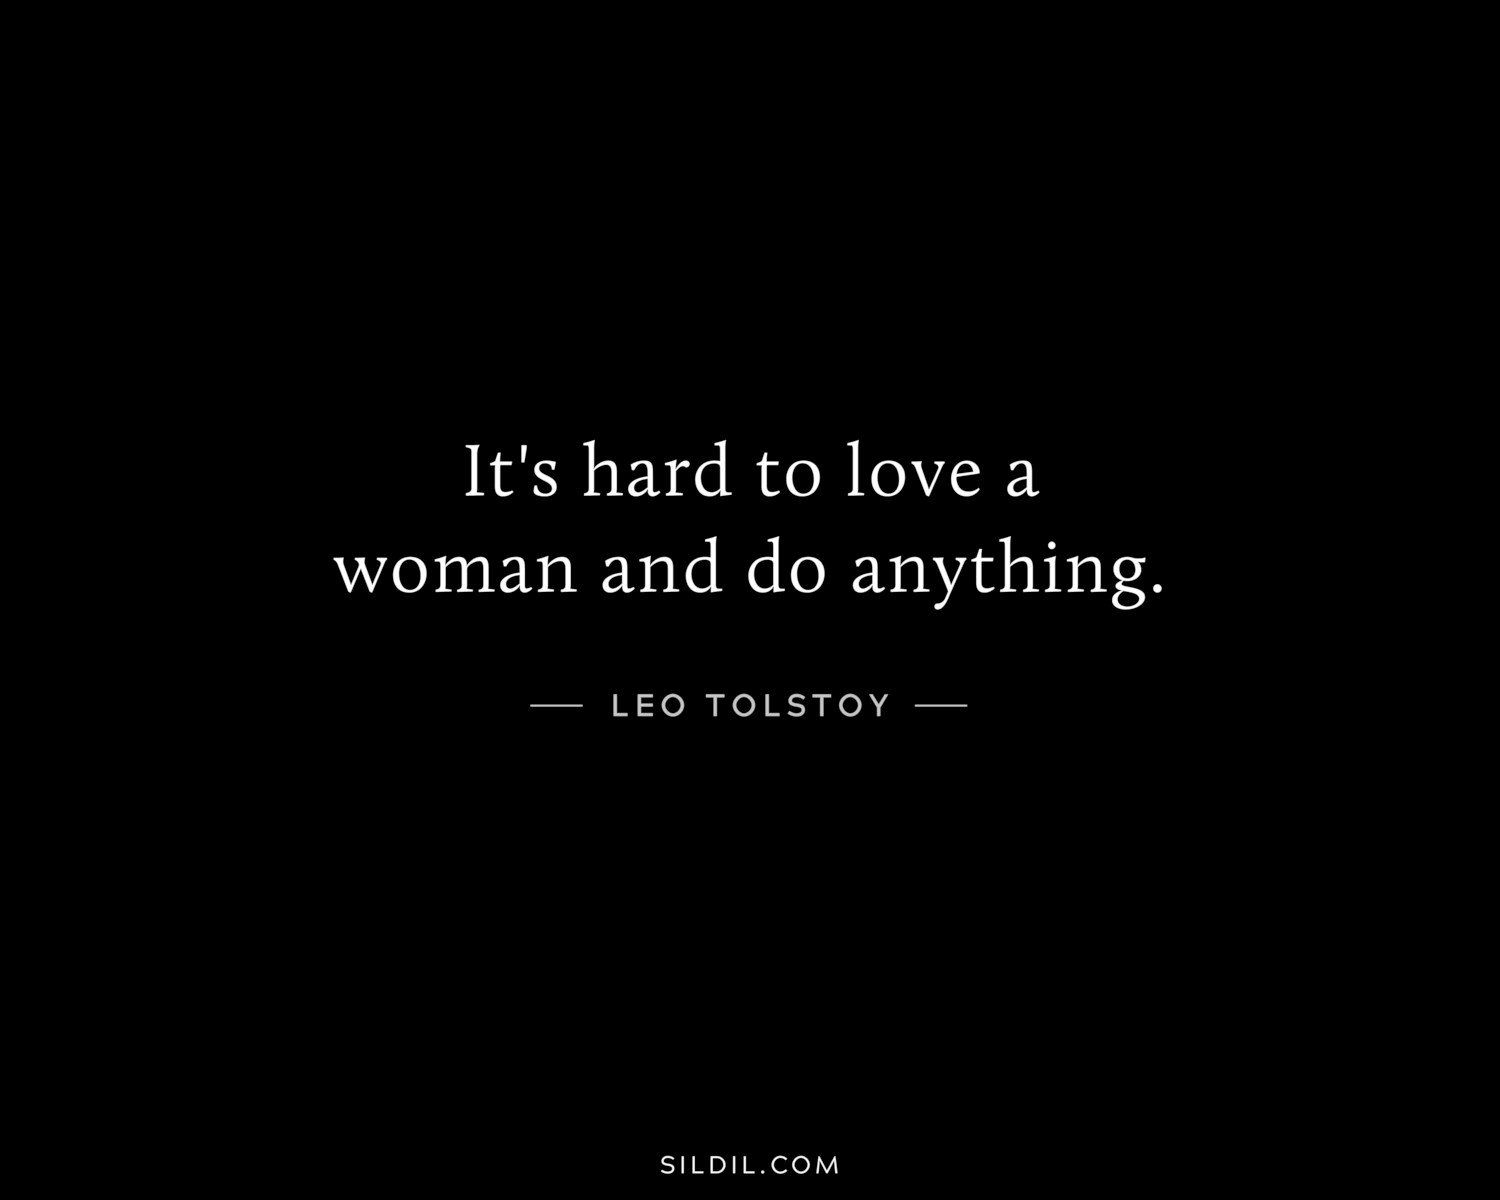 It's hard to love a woman and do anything.